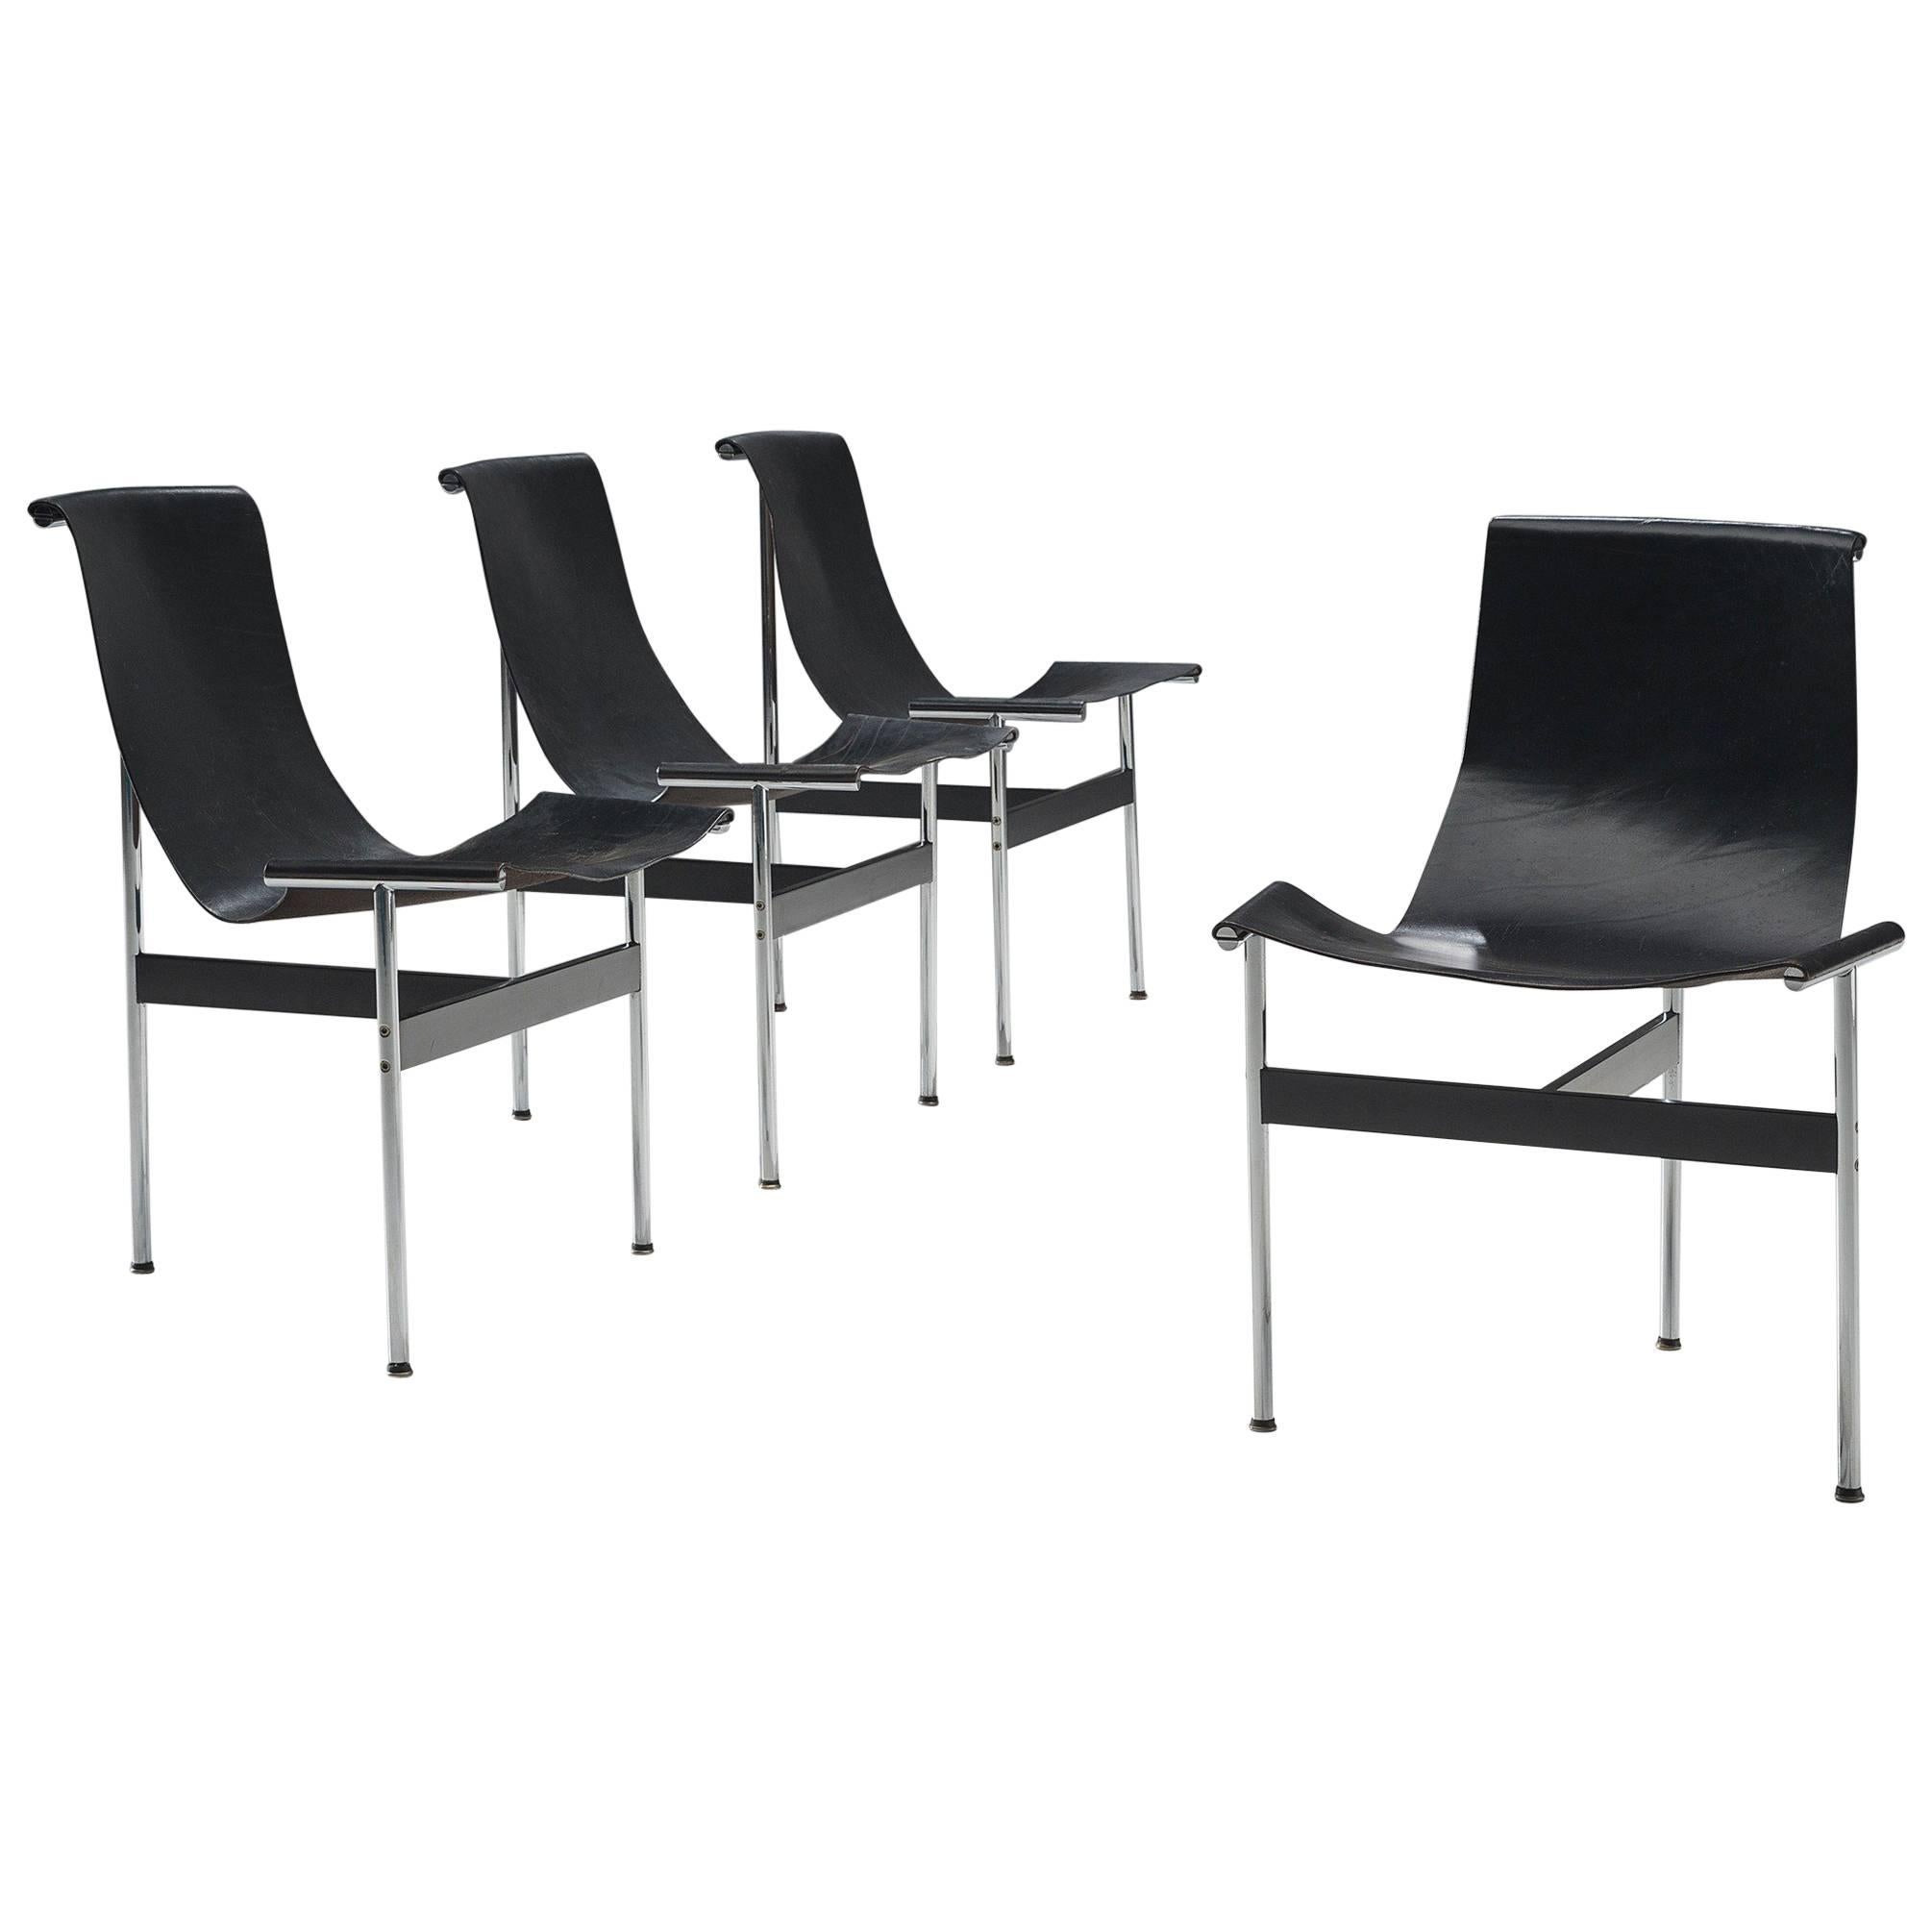 Katavolos Kelly and Littell T-Chairs in Original Black Leather